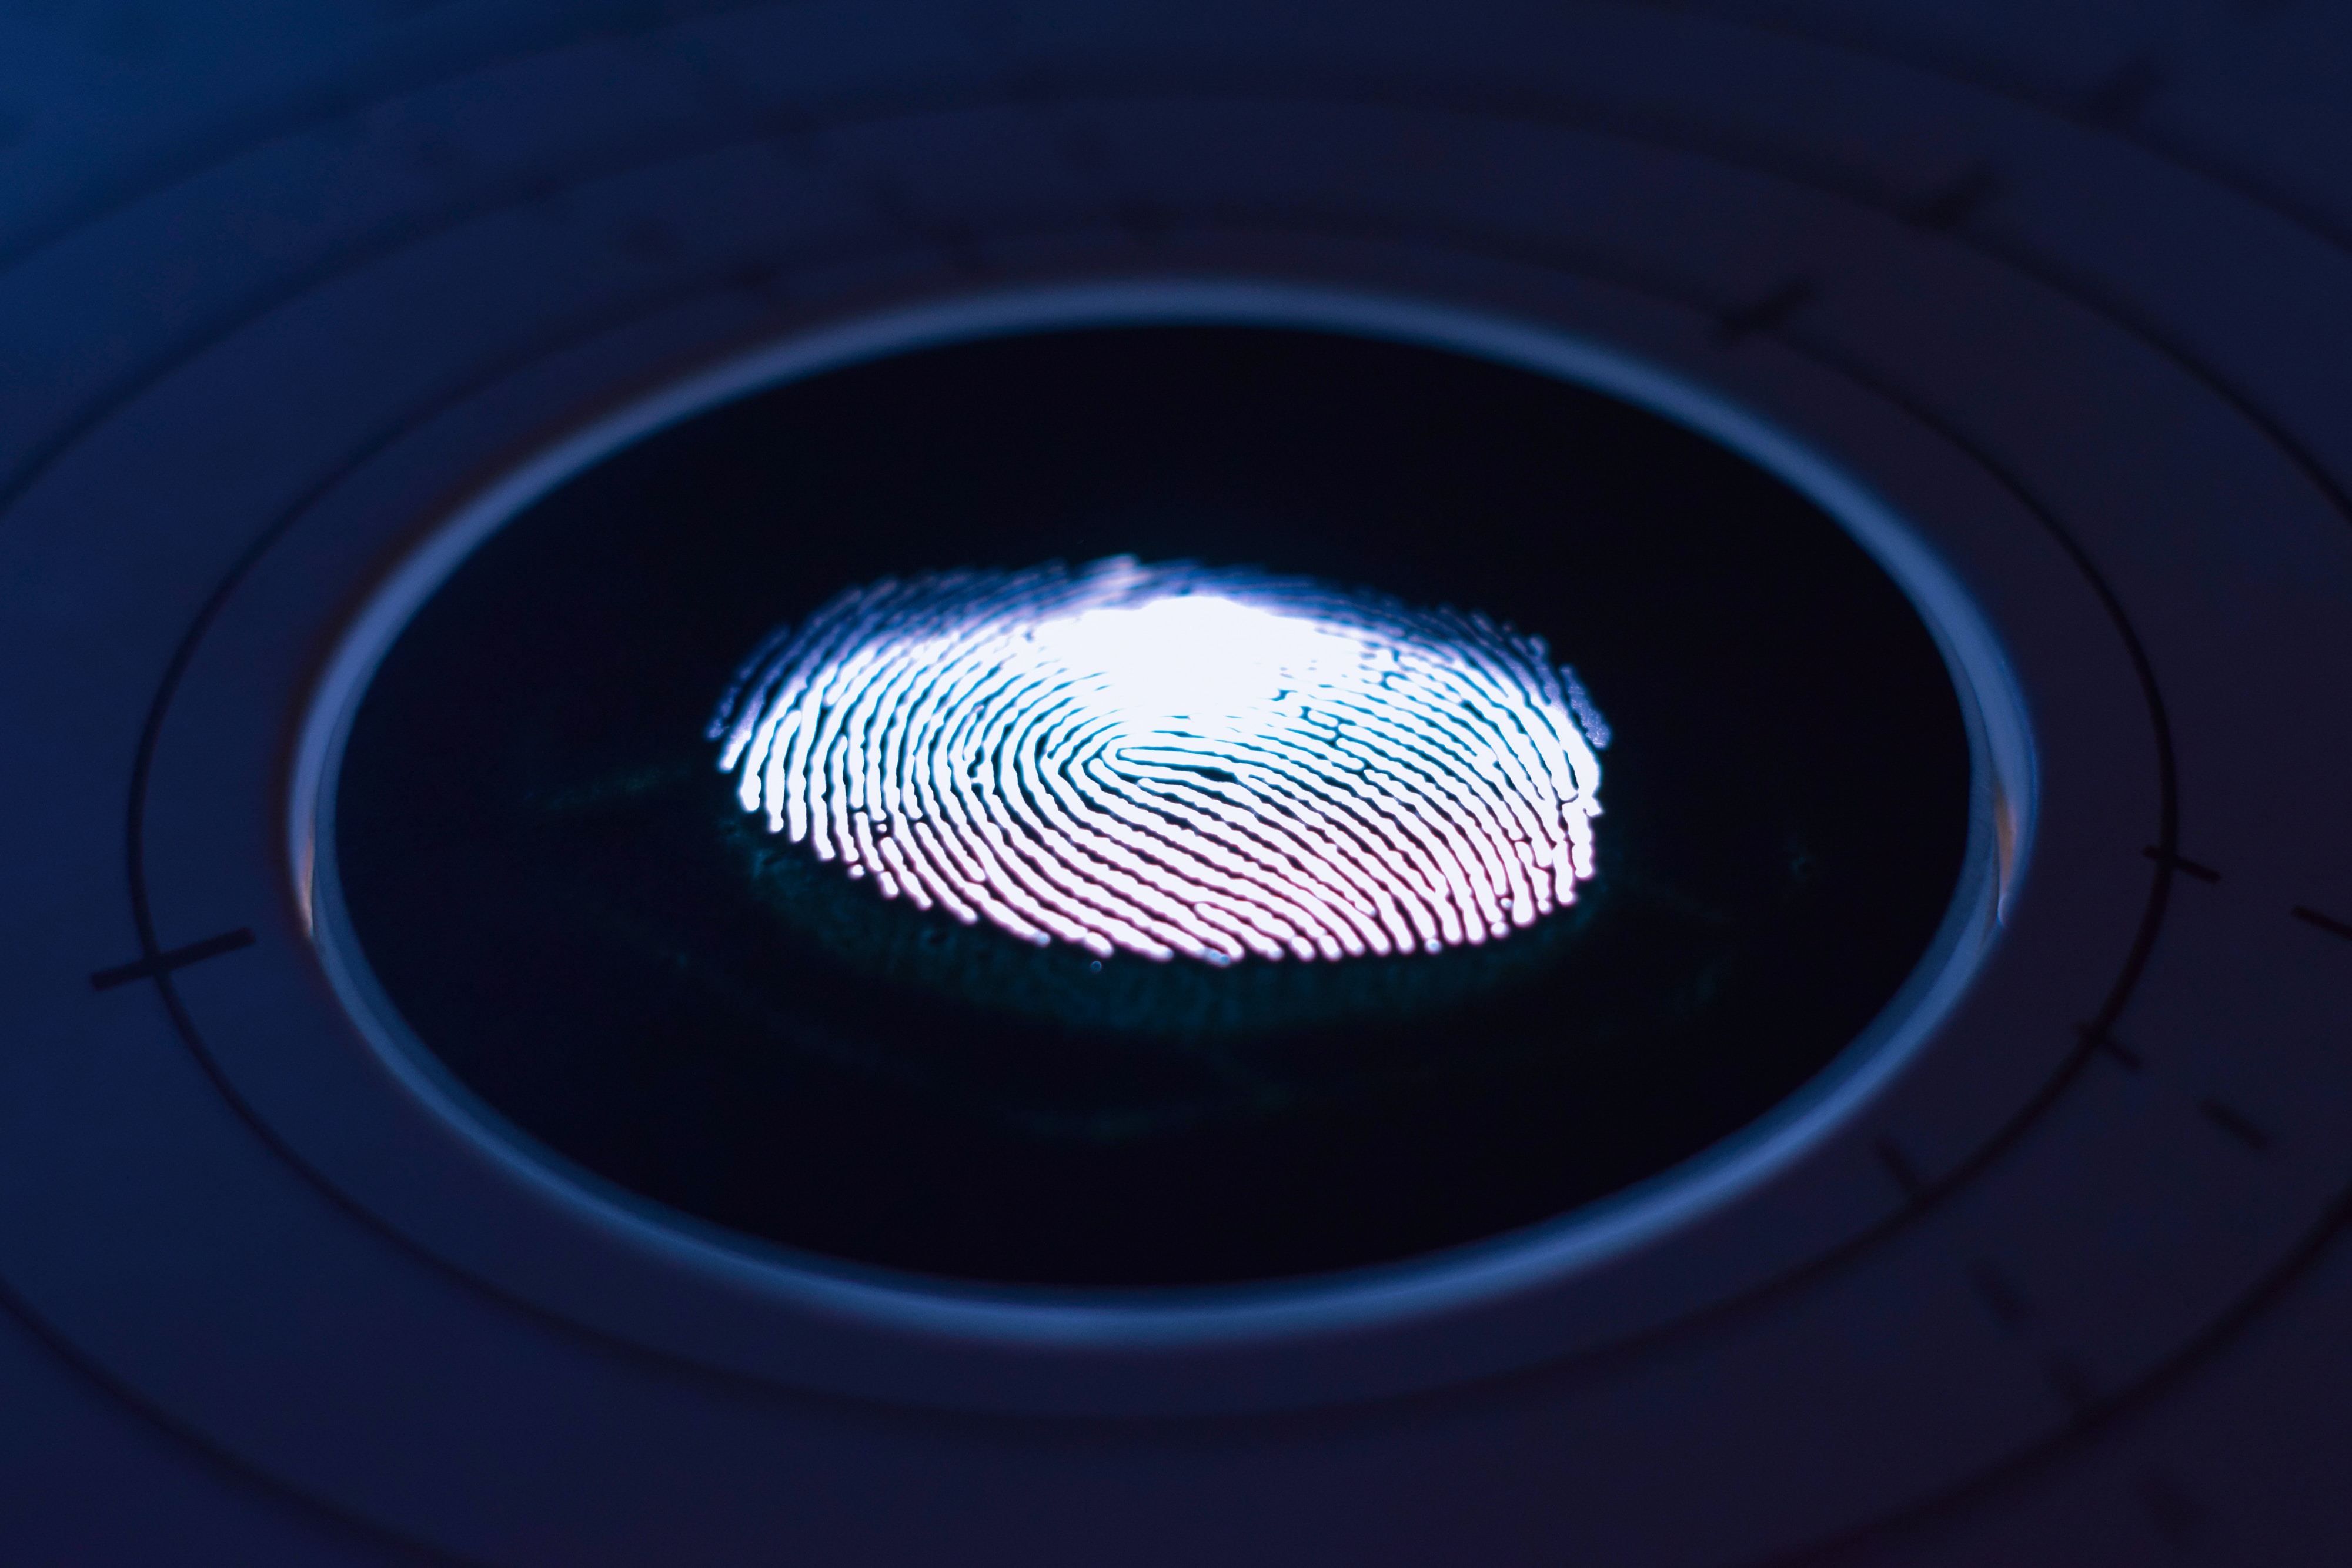 Artificial intelligence has discovered similarities between one person's fingerprints, something previously thought impossible